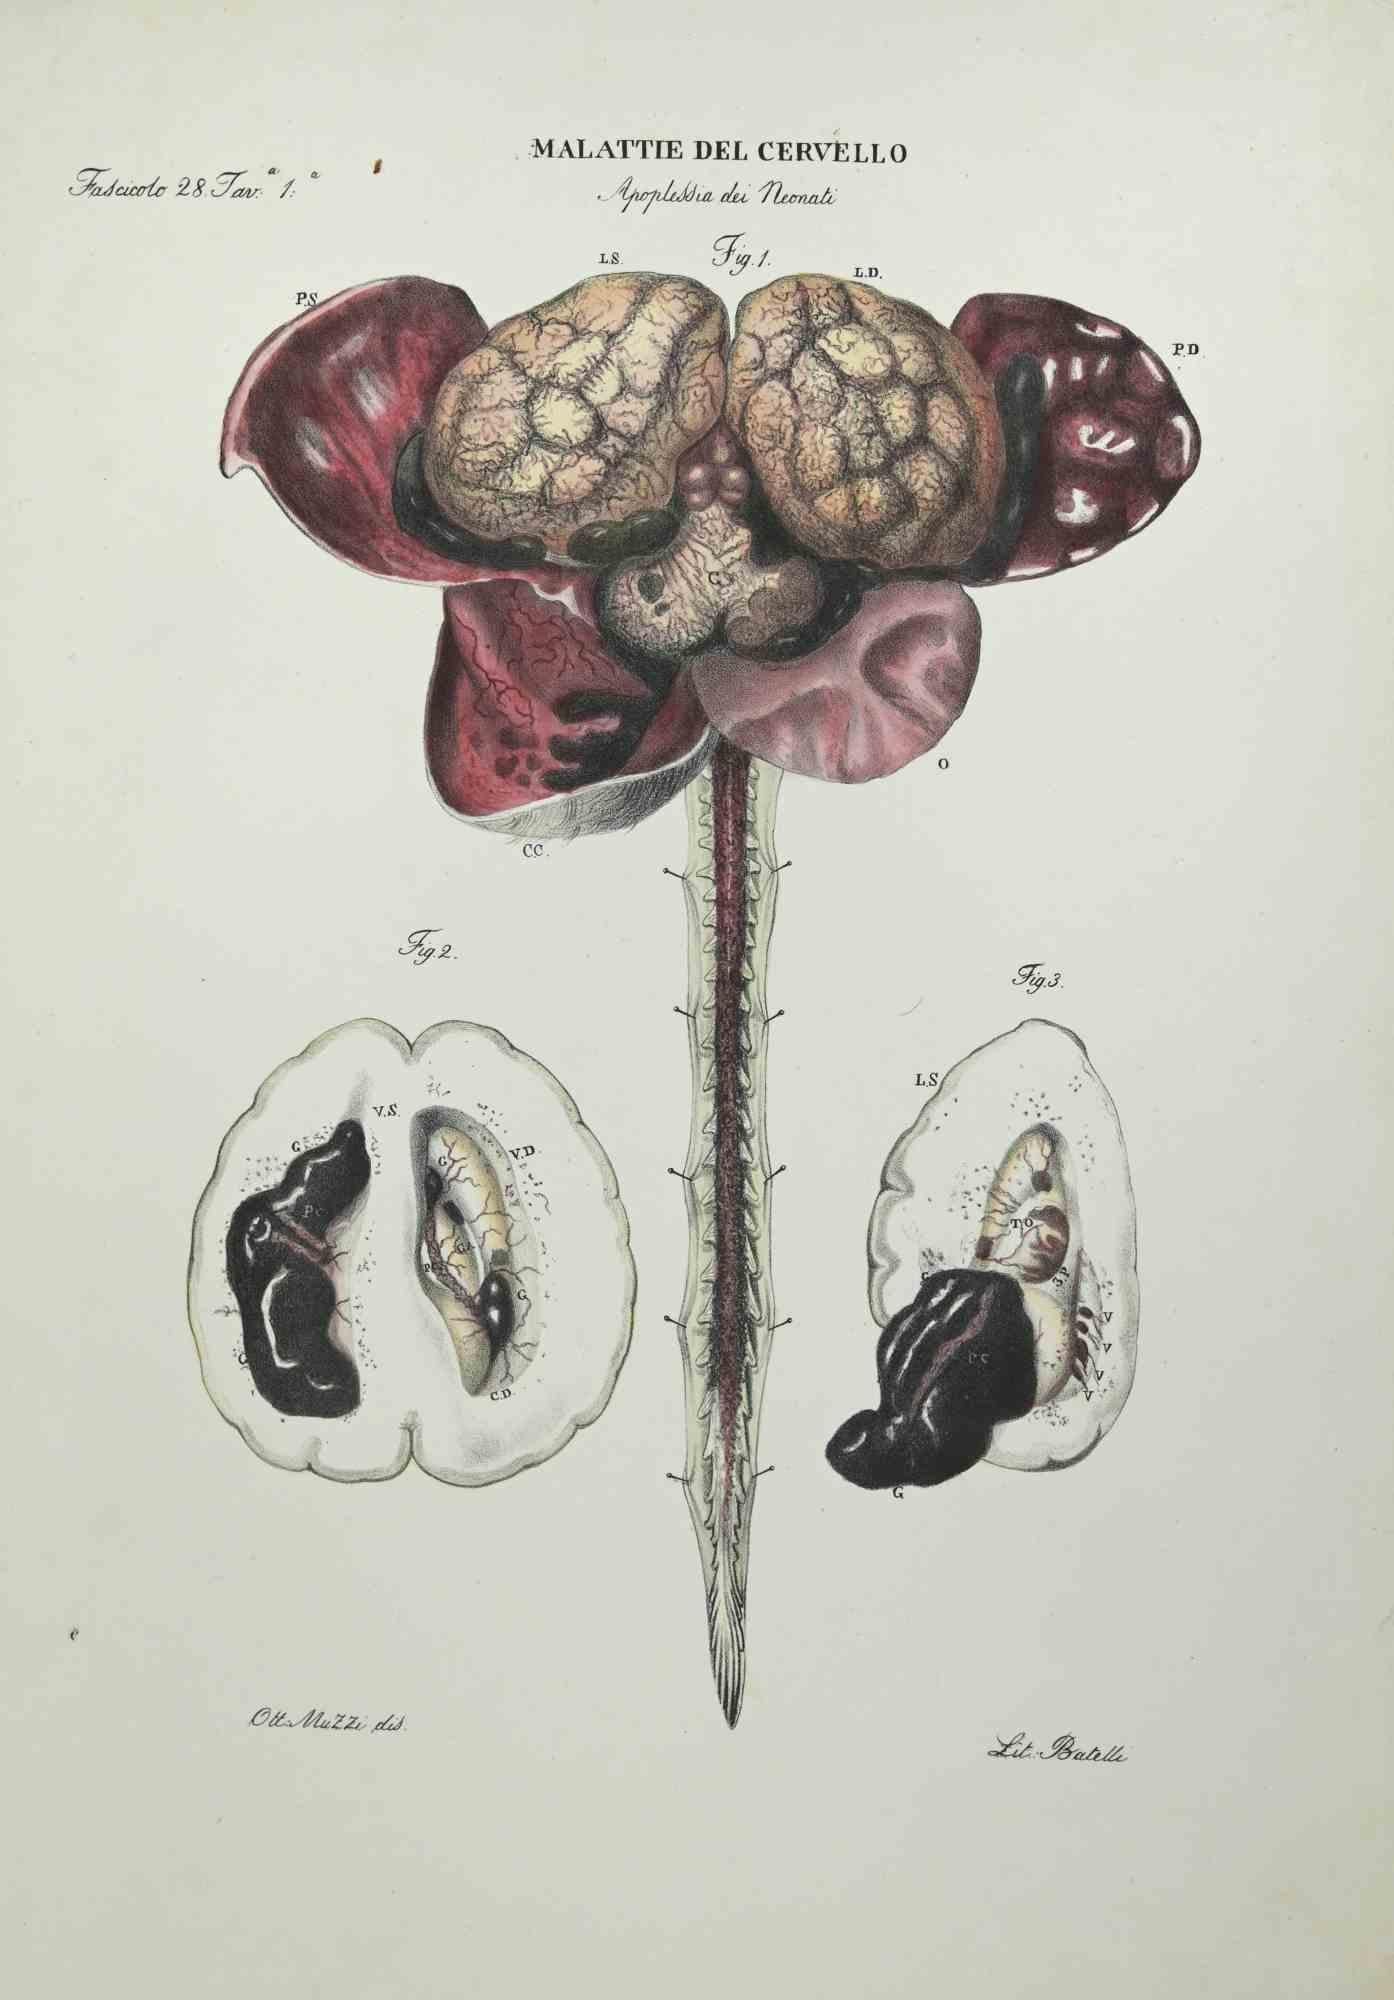  Brain Diseases is a lithograph hand colored by Ottavio Muzzi for the edition of Antoine Chazal,Human Anatomy, Printers Batelli and Ridolfi, realized in 1843.
Signed on plate on the lower left margin. 

The artwork belongs to the "Atlante Generale